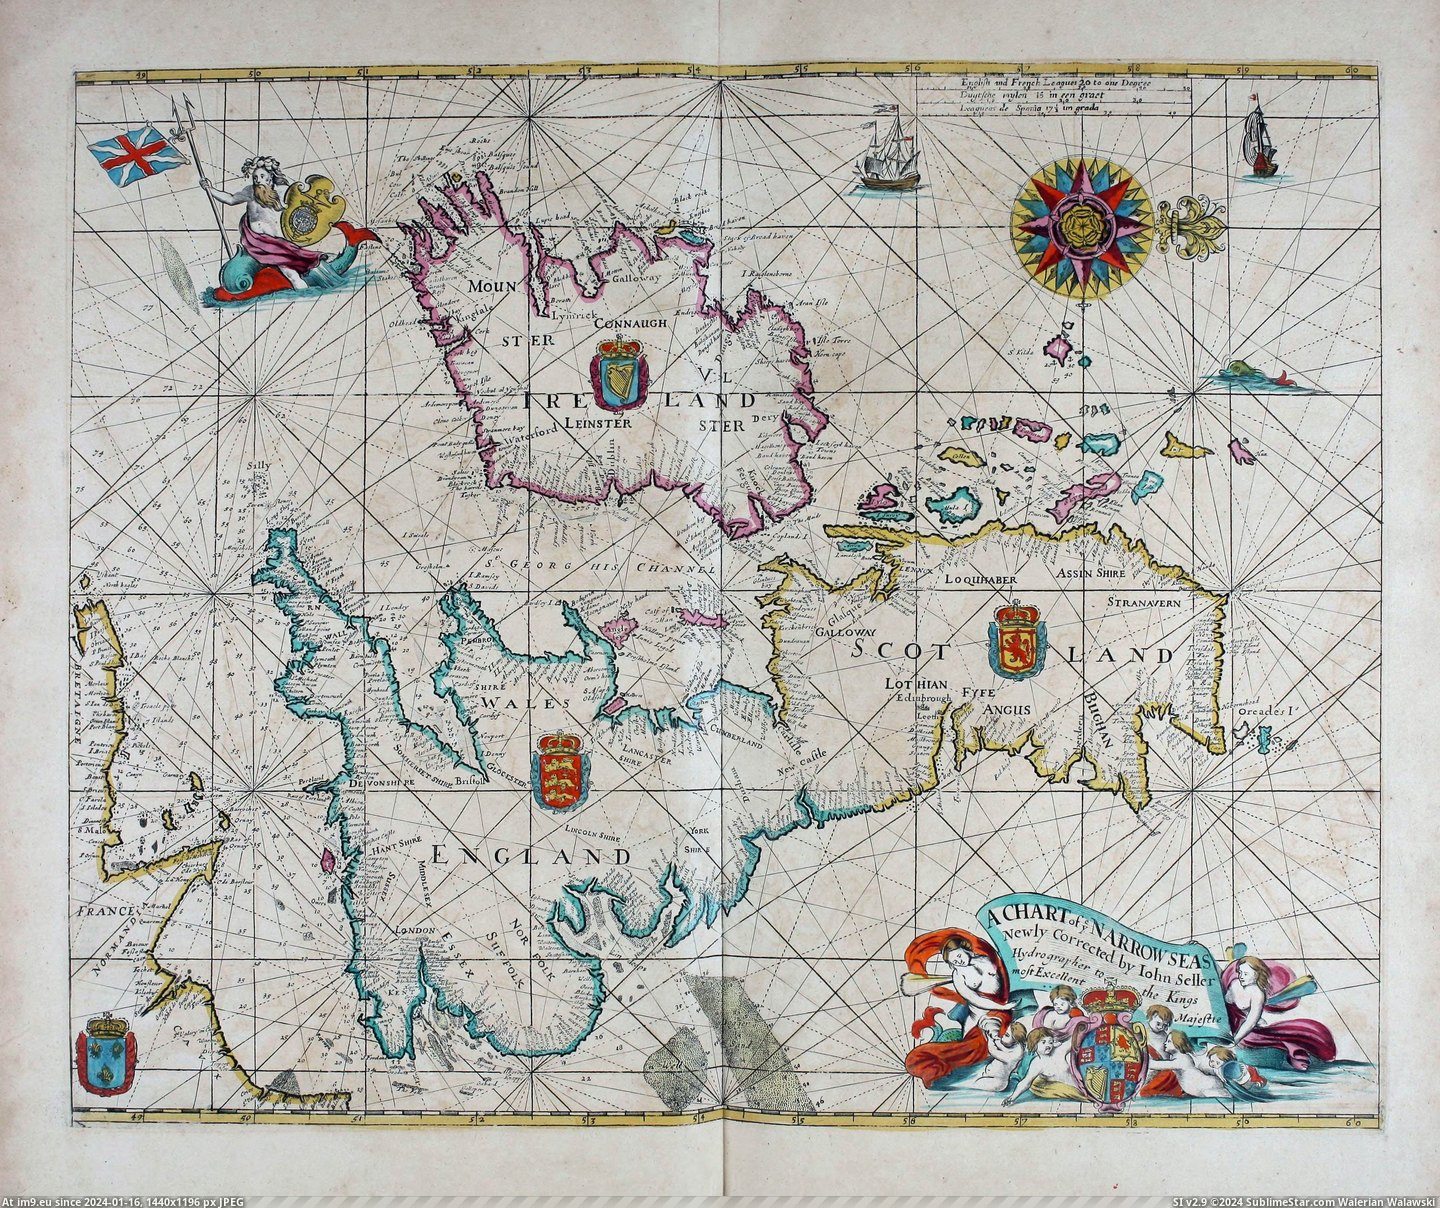 #King #John #Narrow #Seller #Chart #Detailed [Mapporn] A Detailed Navigation Chart Of The Narrow Seas from 1672 - By John Seller, The King's Hydrographer [4061x3384] Pic. (Bild von album My r/MAPS favs))